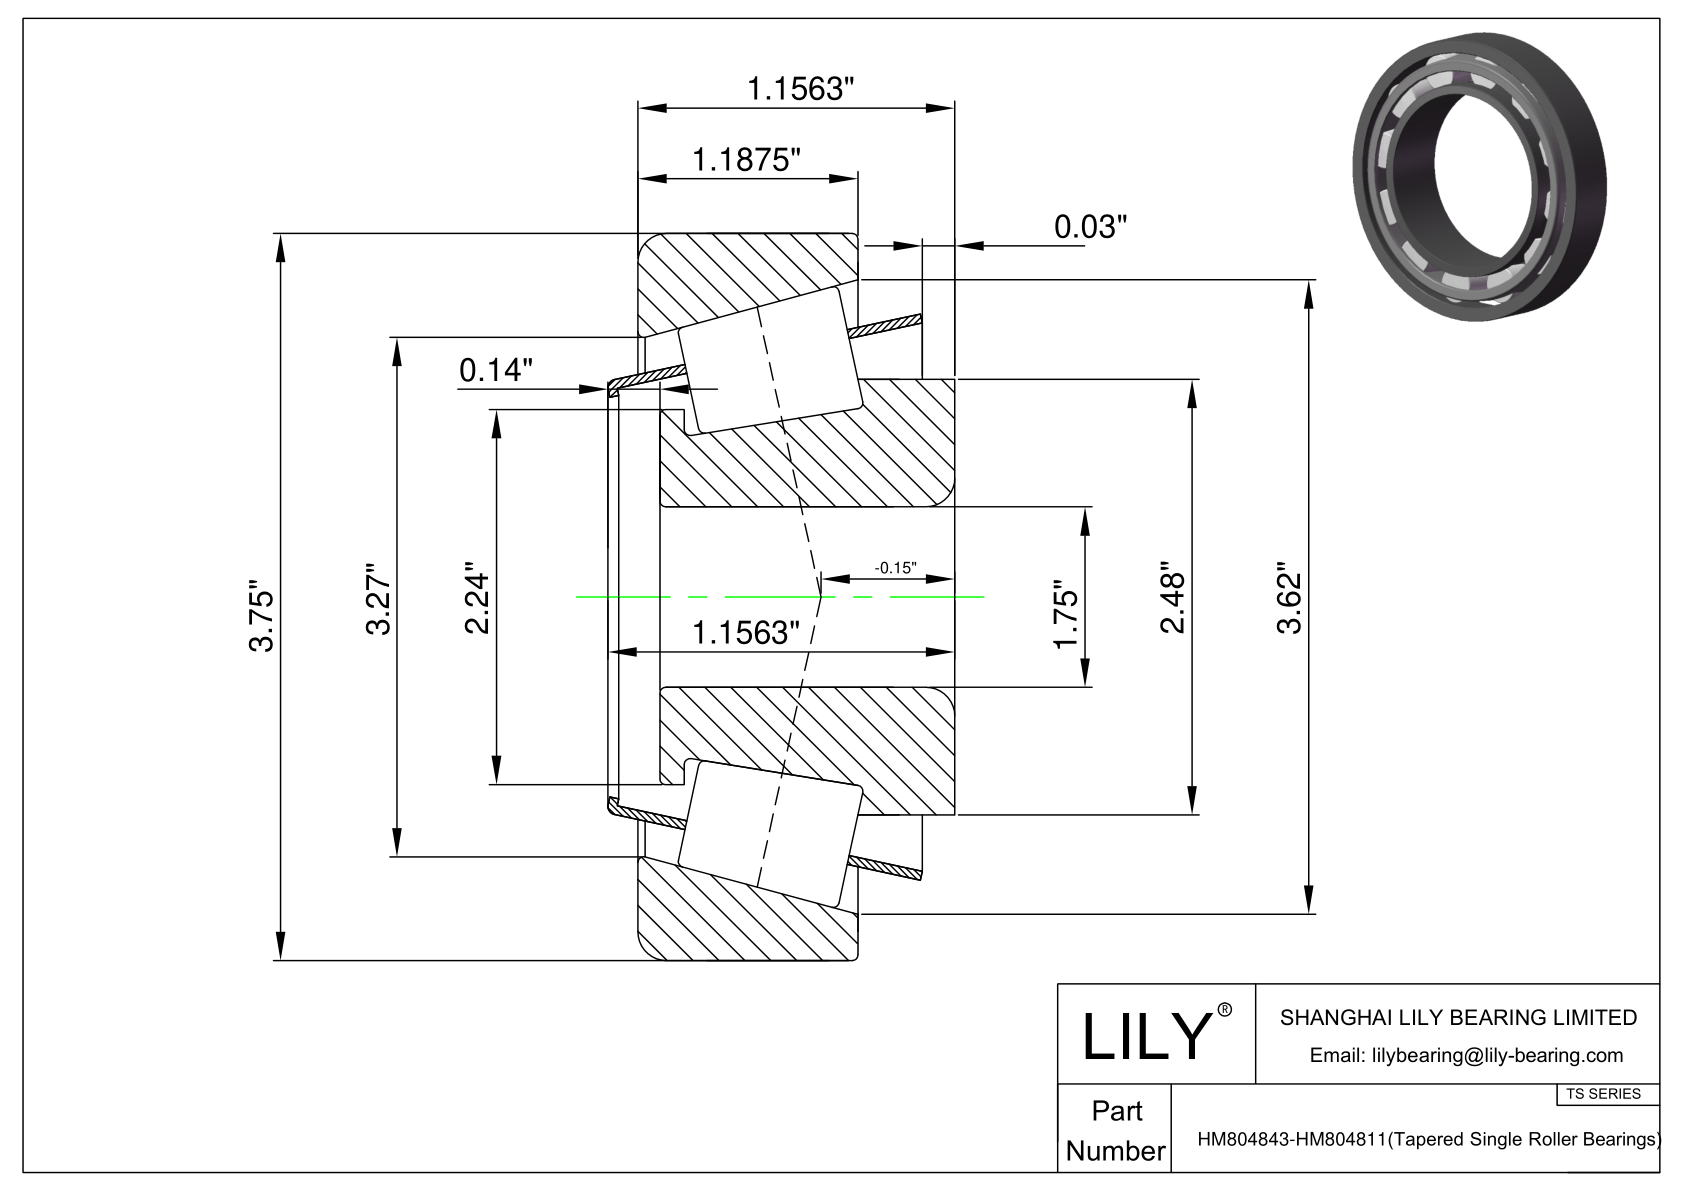 HM804843-HM804811 TS (Tapered Single Roller Bearings) (Imperial) cad drawing